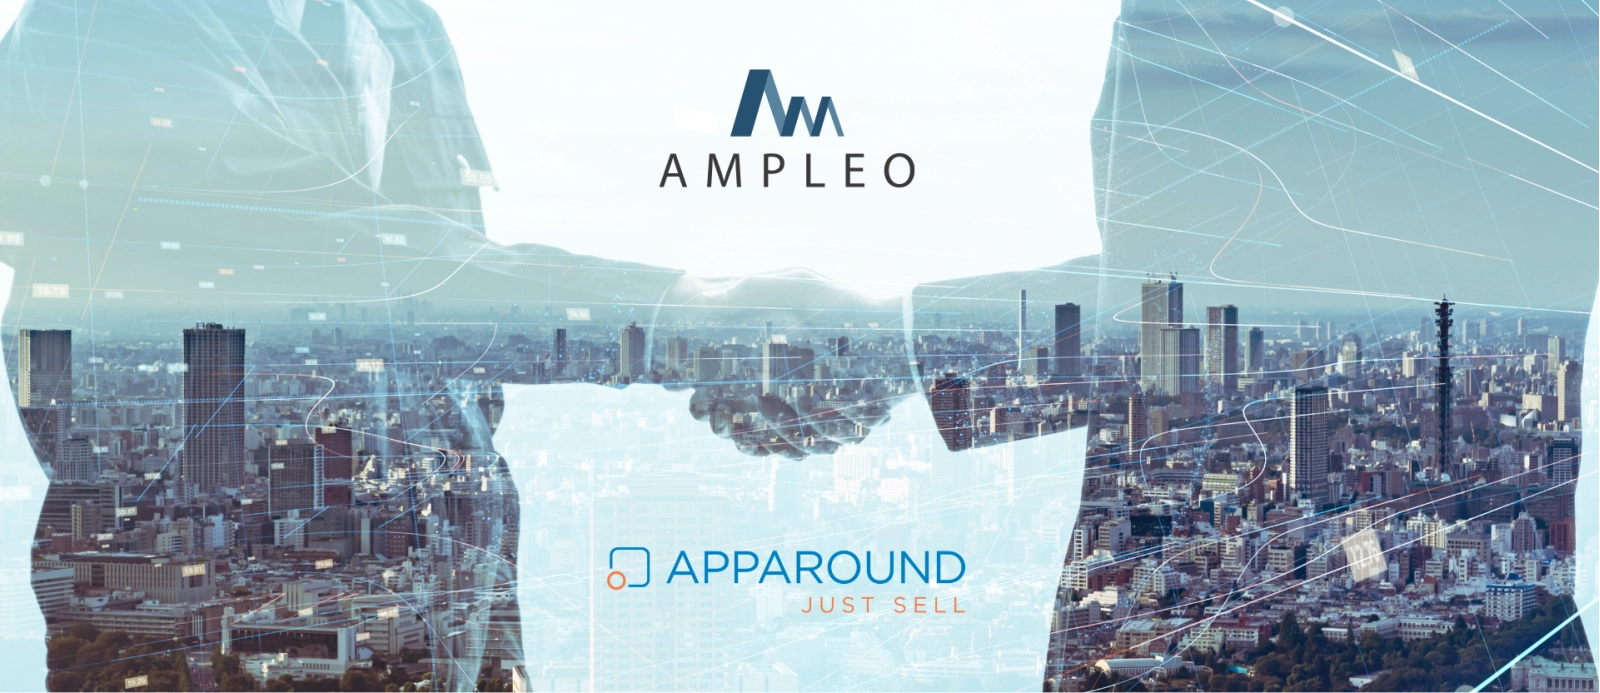 Ampleo launches a new partnership with Apparound